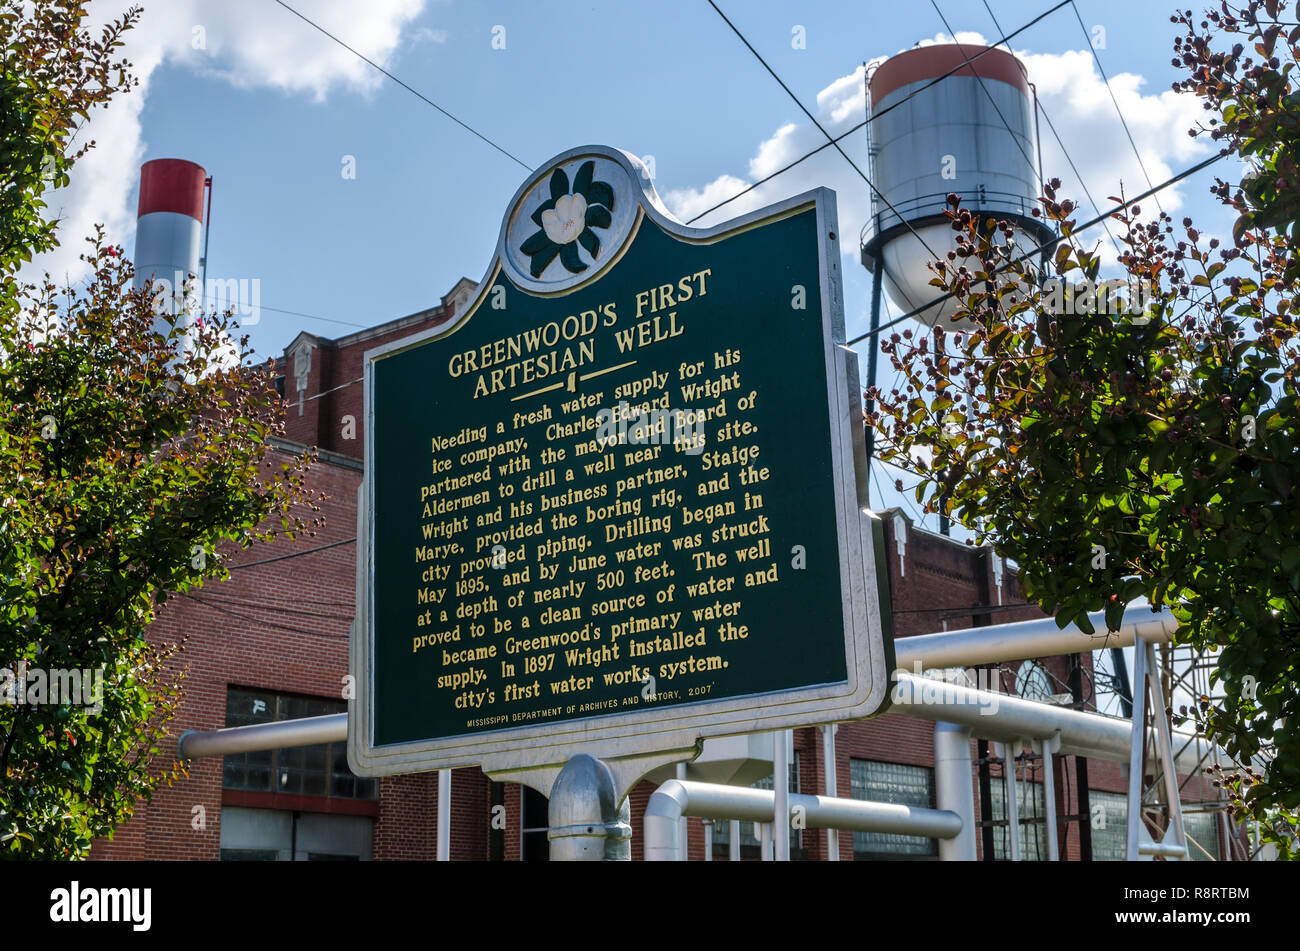 A historic marker commemorates the first artesian well in Greenwood, Mississippi. The city's first water works system was built in 1897. Stock Photo